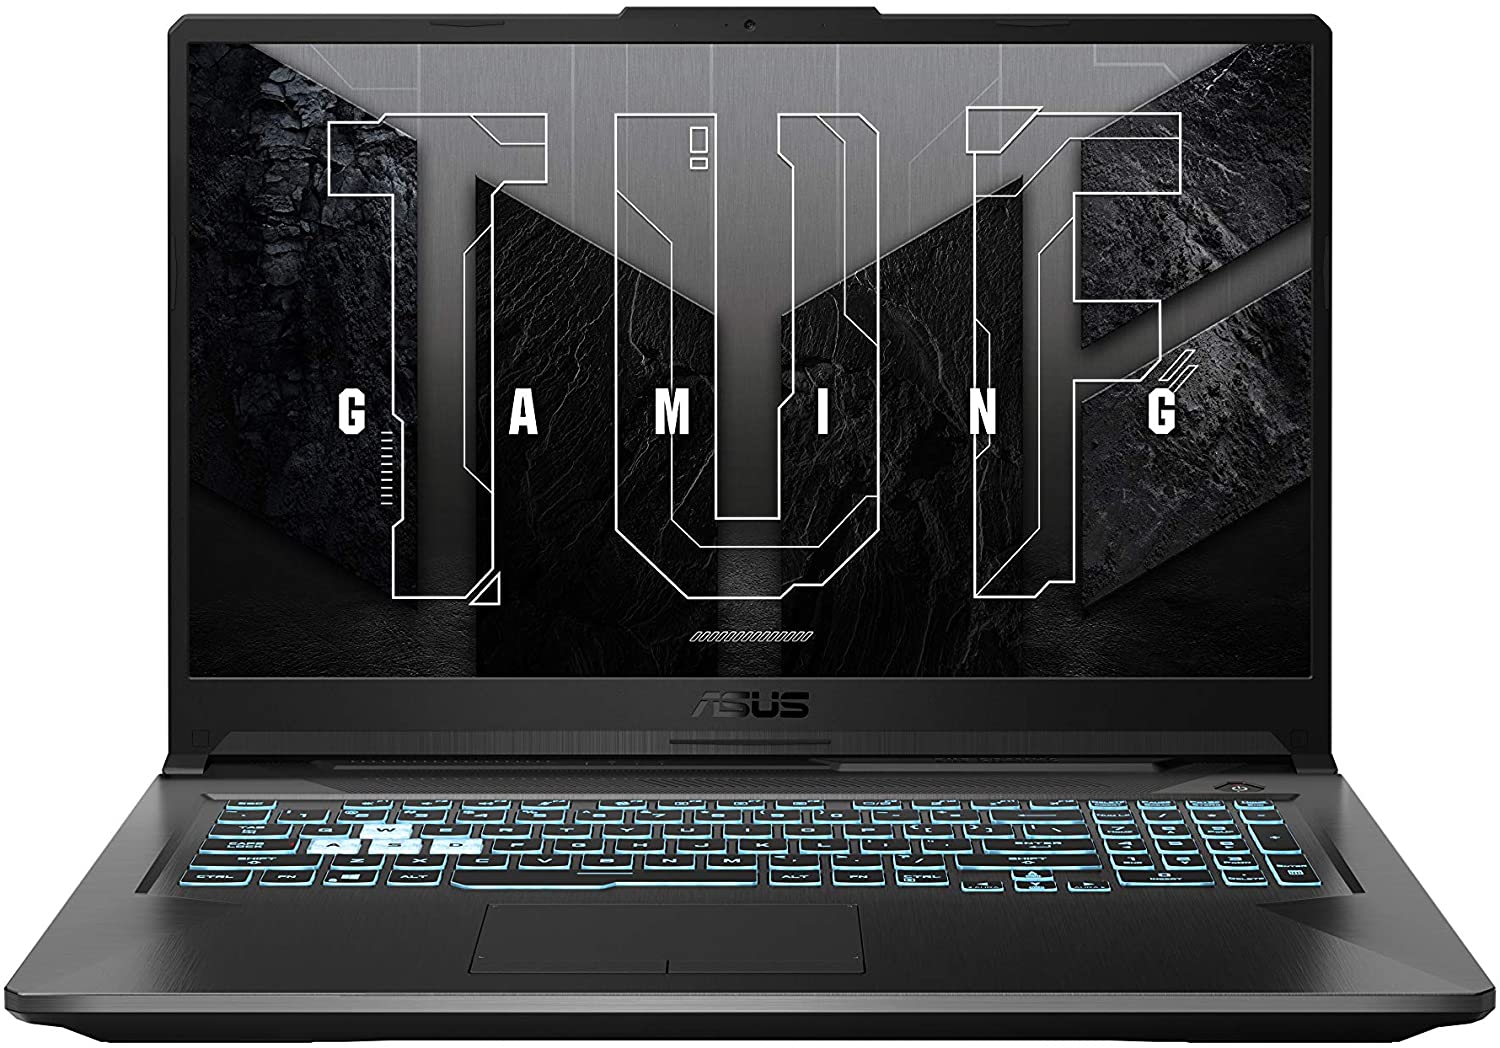 ASUS TUF Gaming F17 (FX706) - Specs, Tests, and Prices